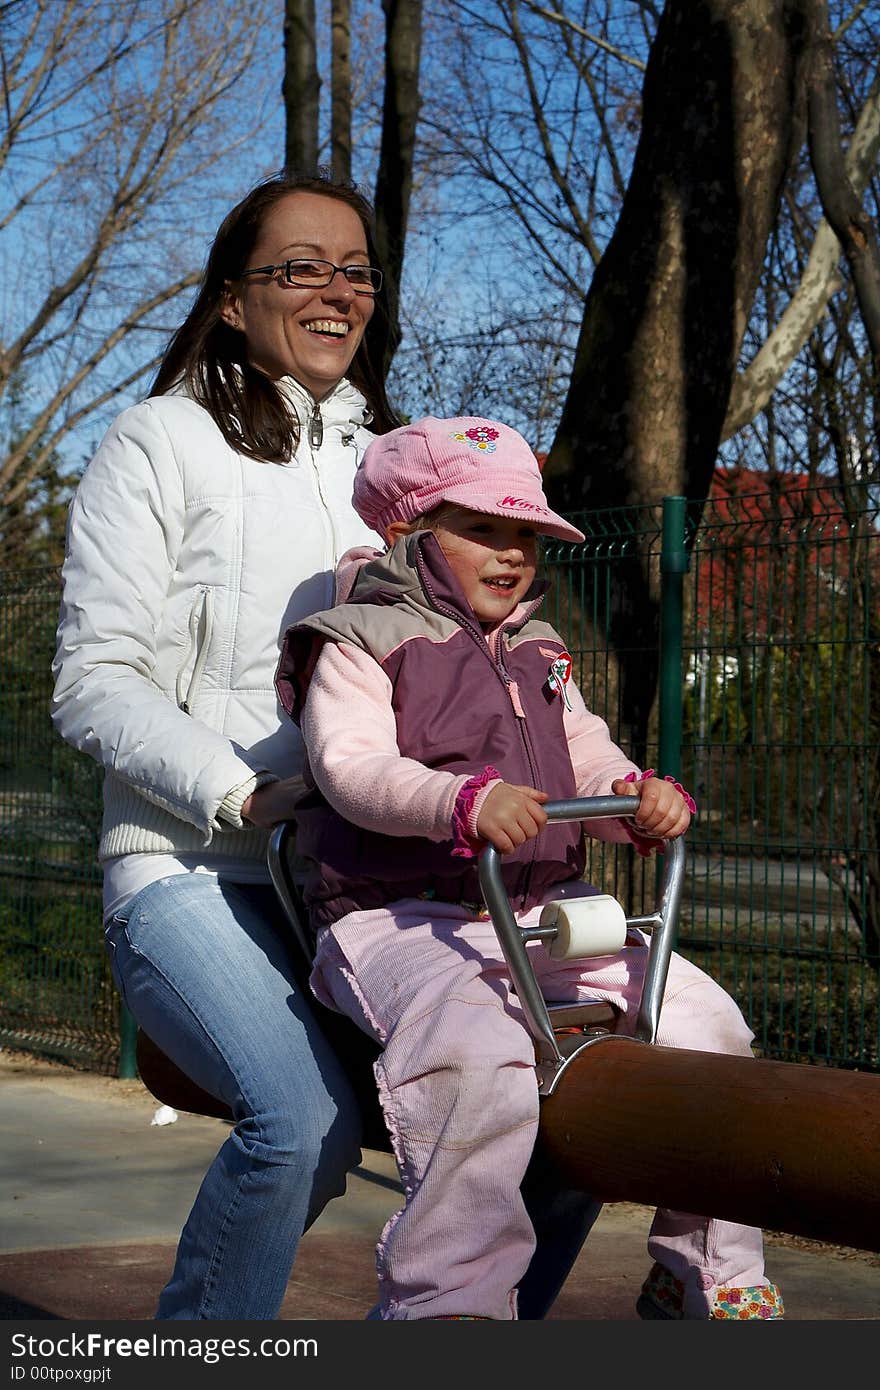 Young girl and children smiling in tandem seesaw.